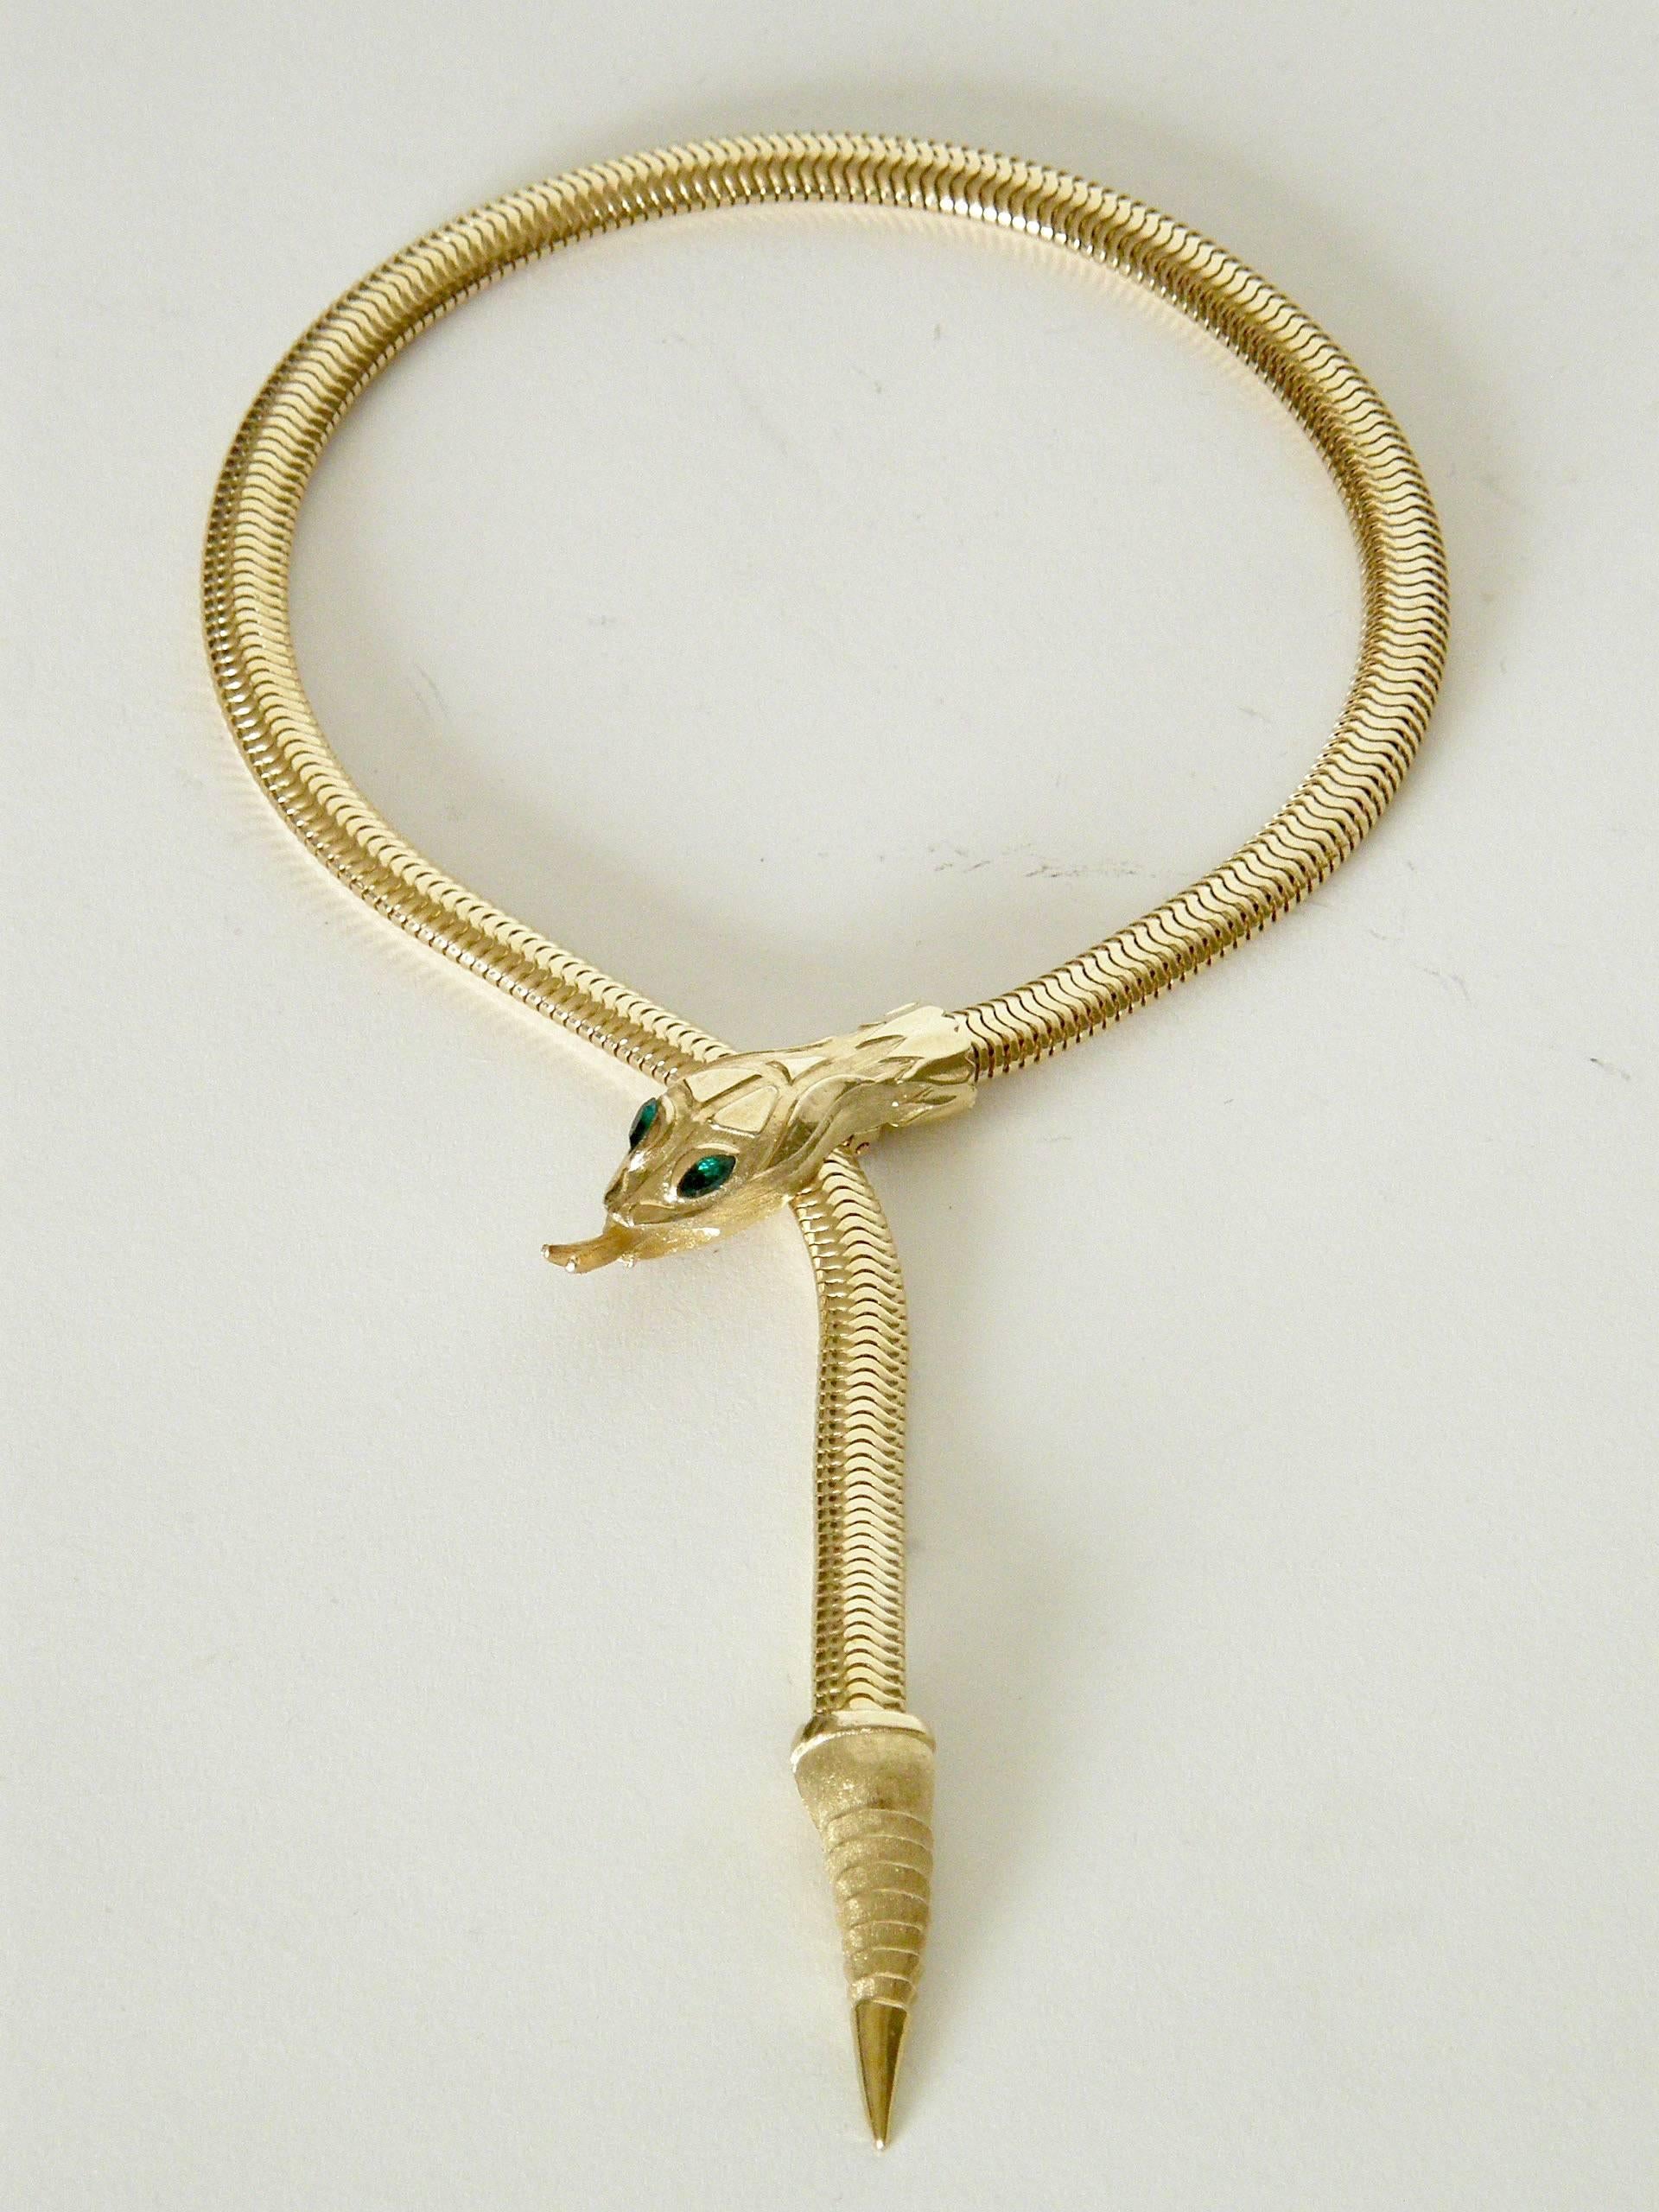 This sleek, rattlesnake necklace and bracelet set designed by Francois for Coro is new/old stock with its tag still attached. The heavy snake chain lies nicely and moves beautifully. The clasp for the necklace is a clip behind the snake's head, and